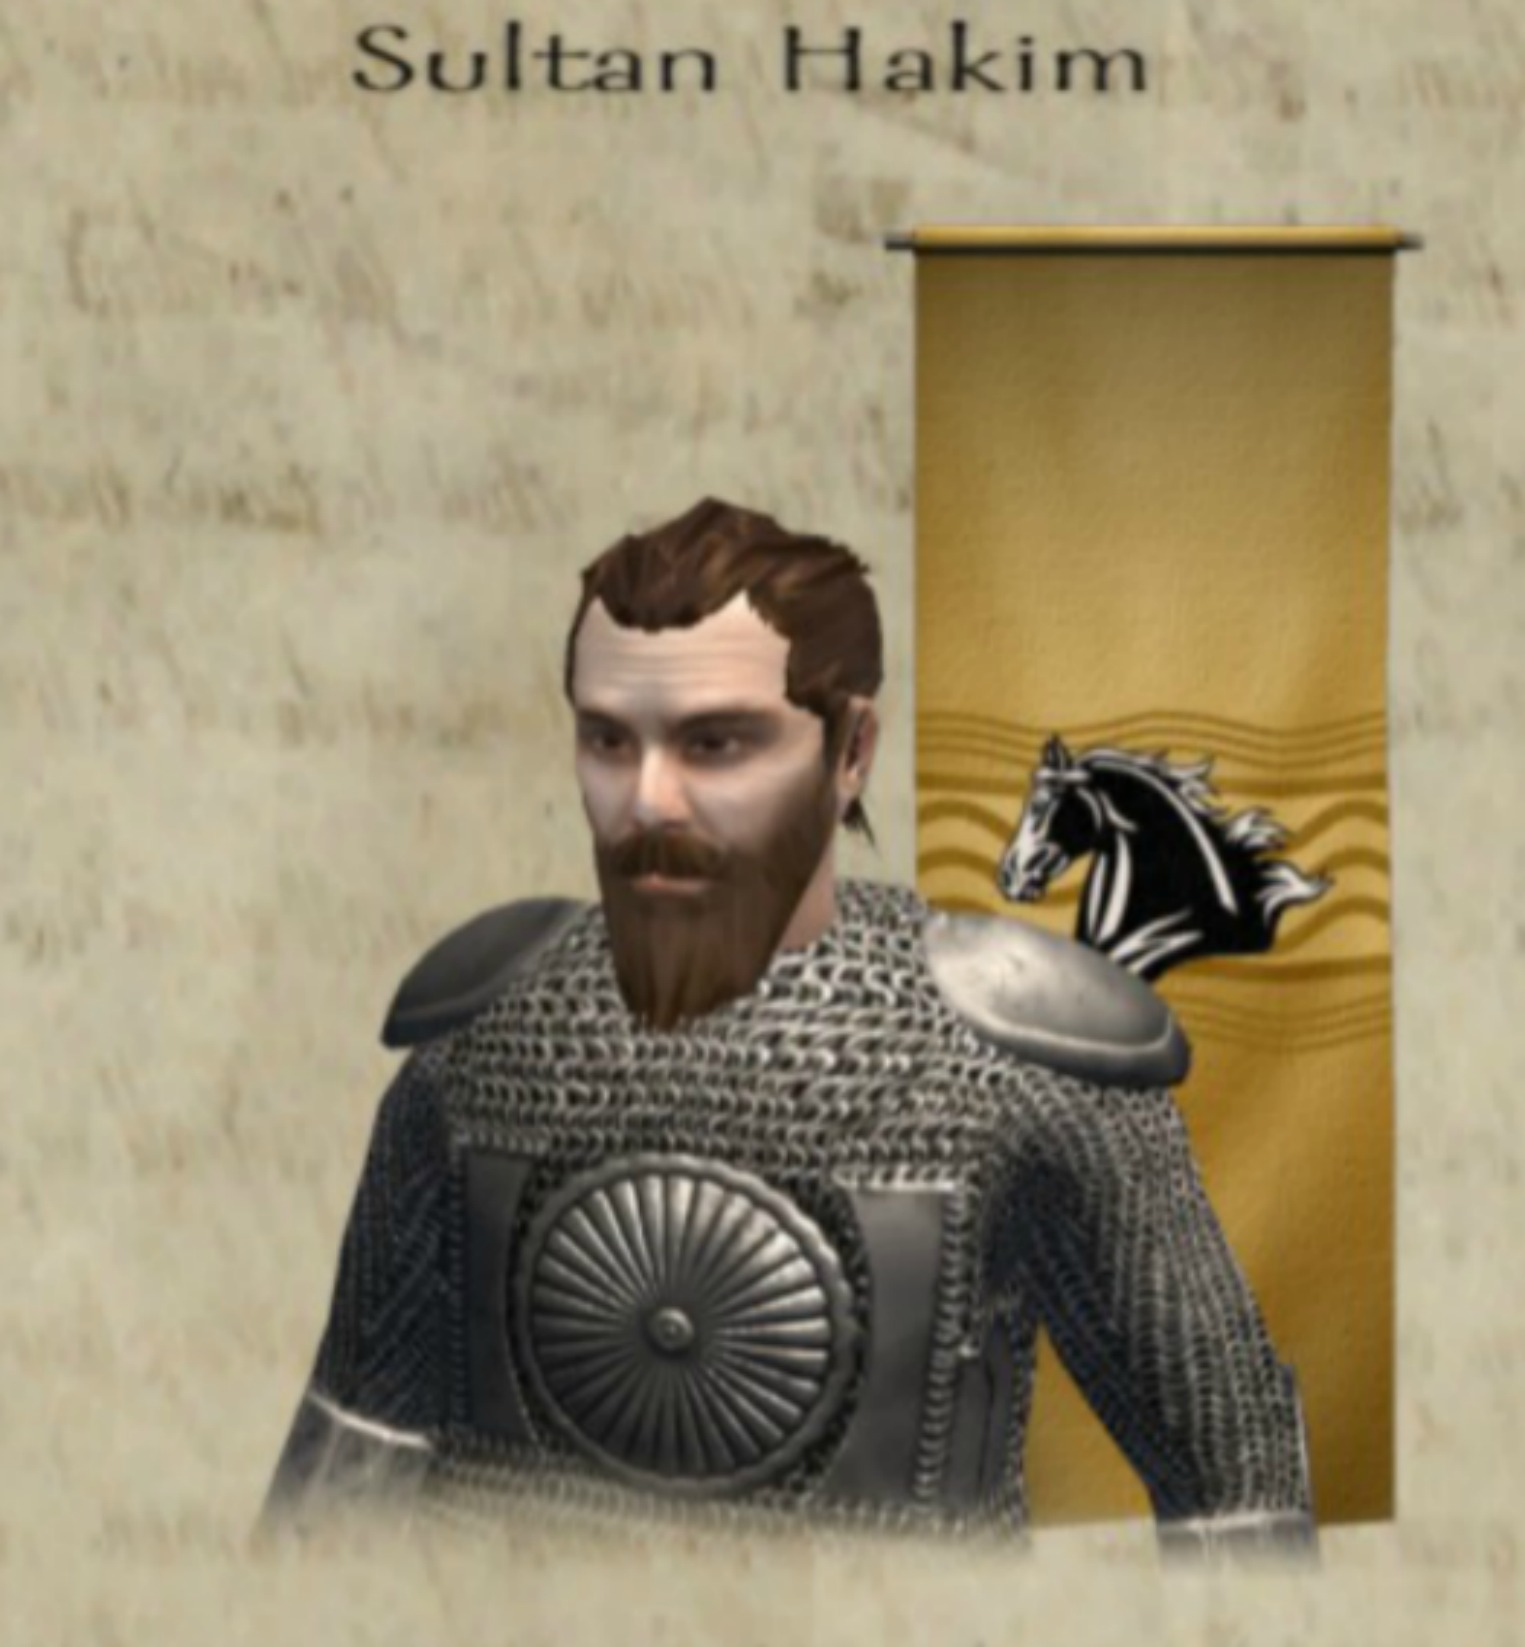 mount and blade wiki swadian lords